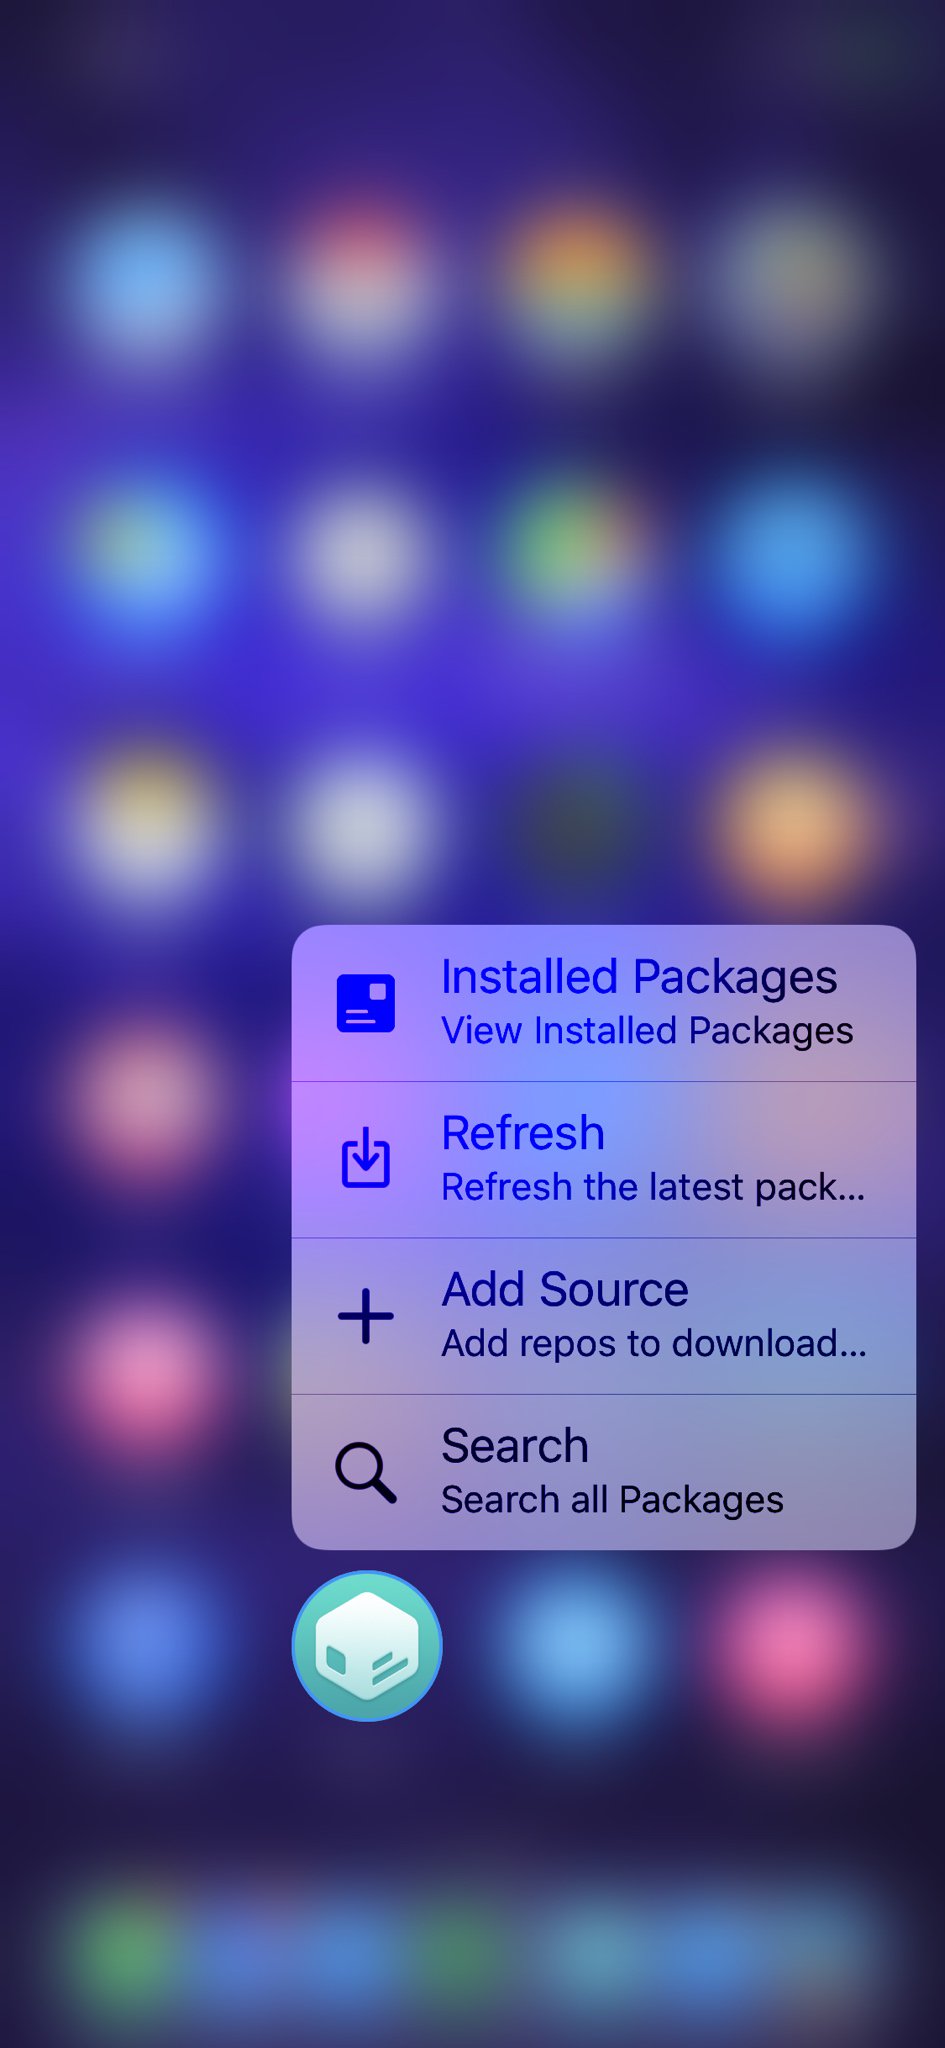 New Sileo Beta Adds 3D Touch Support, Fixes App Crashing Issue